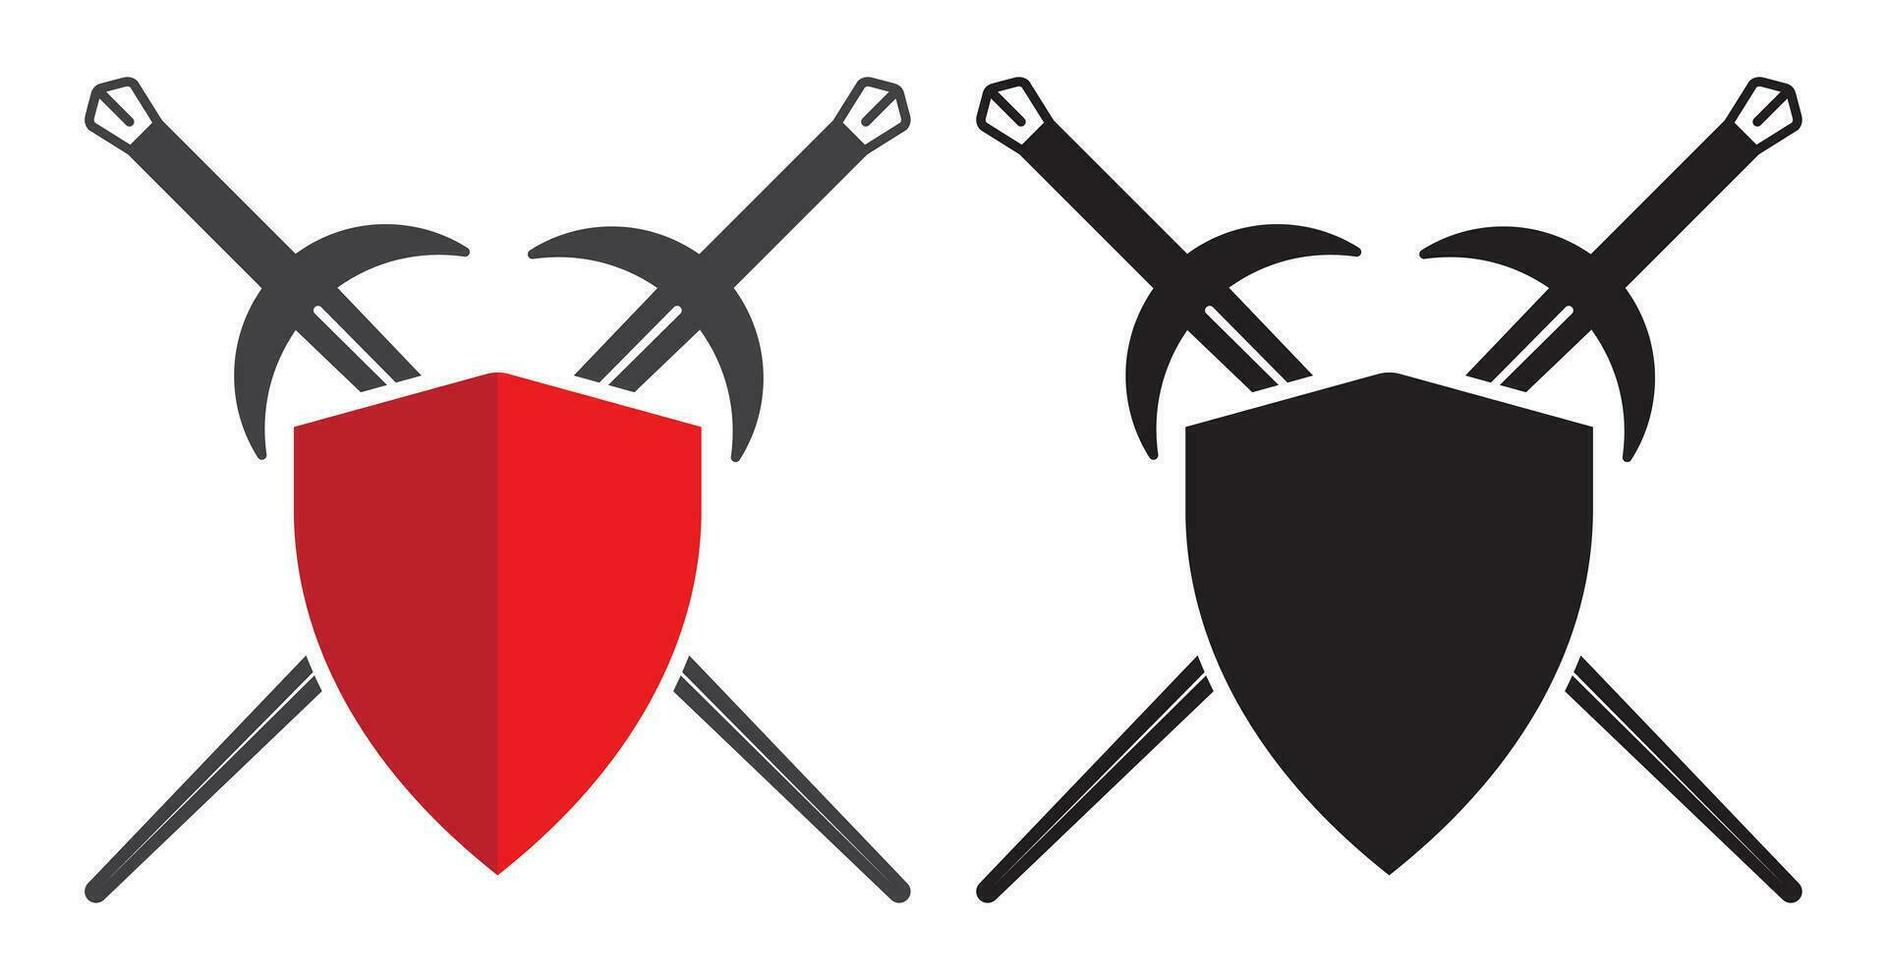 Sword and shield or crossed sword sheath in the shield - flat vector icons for apps and websites